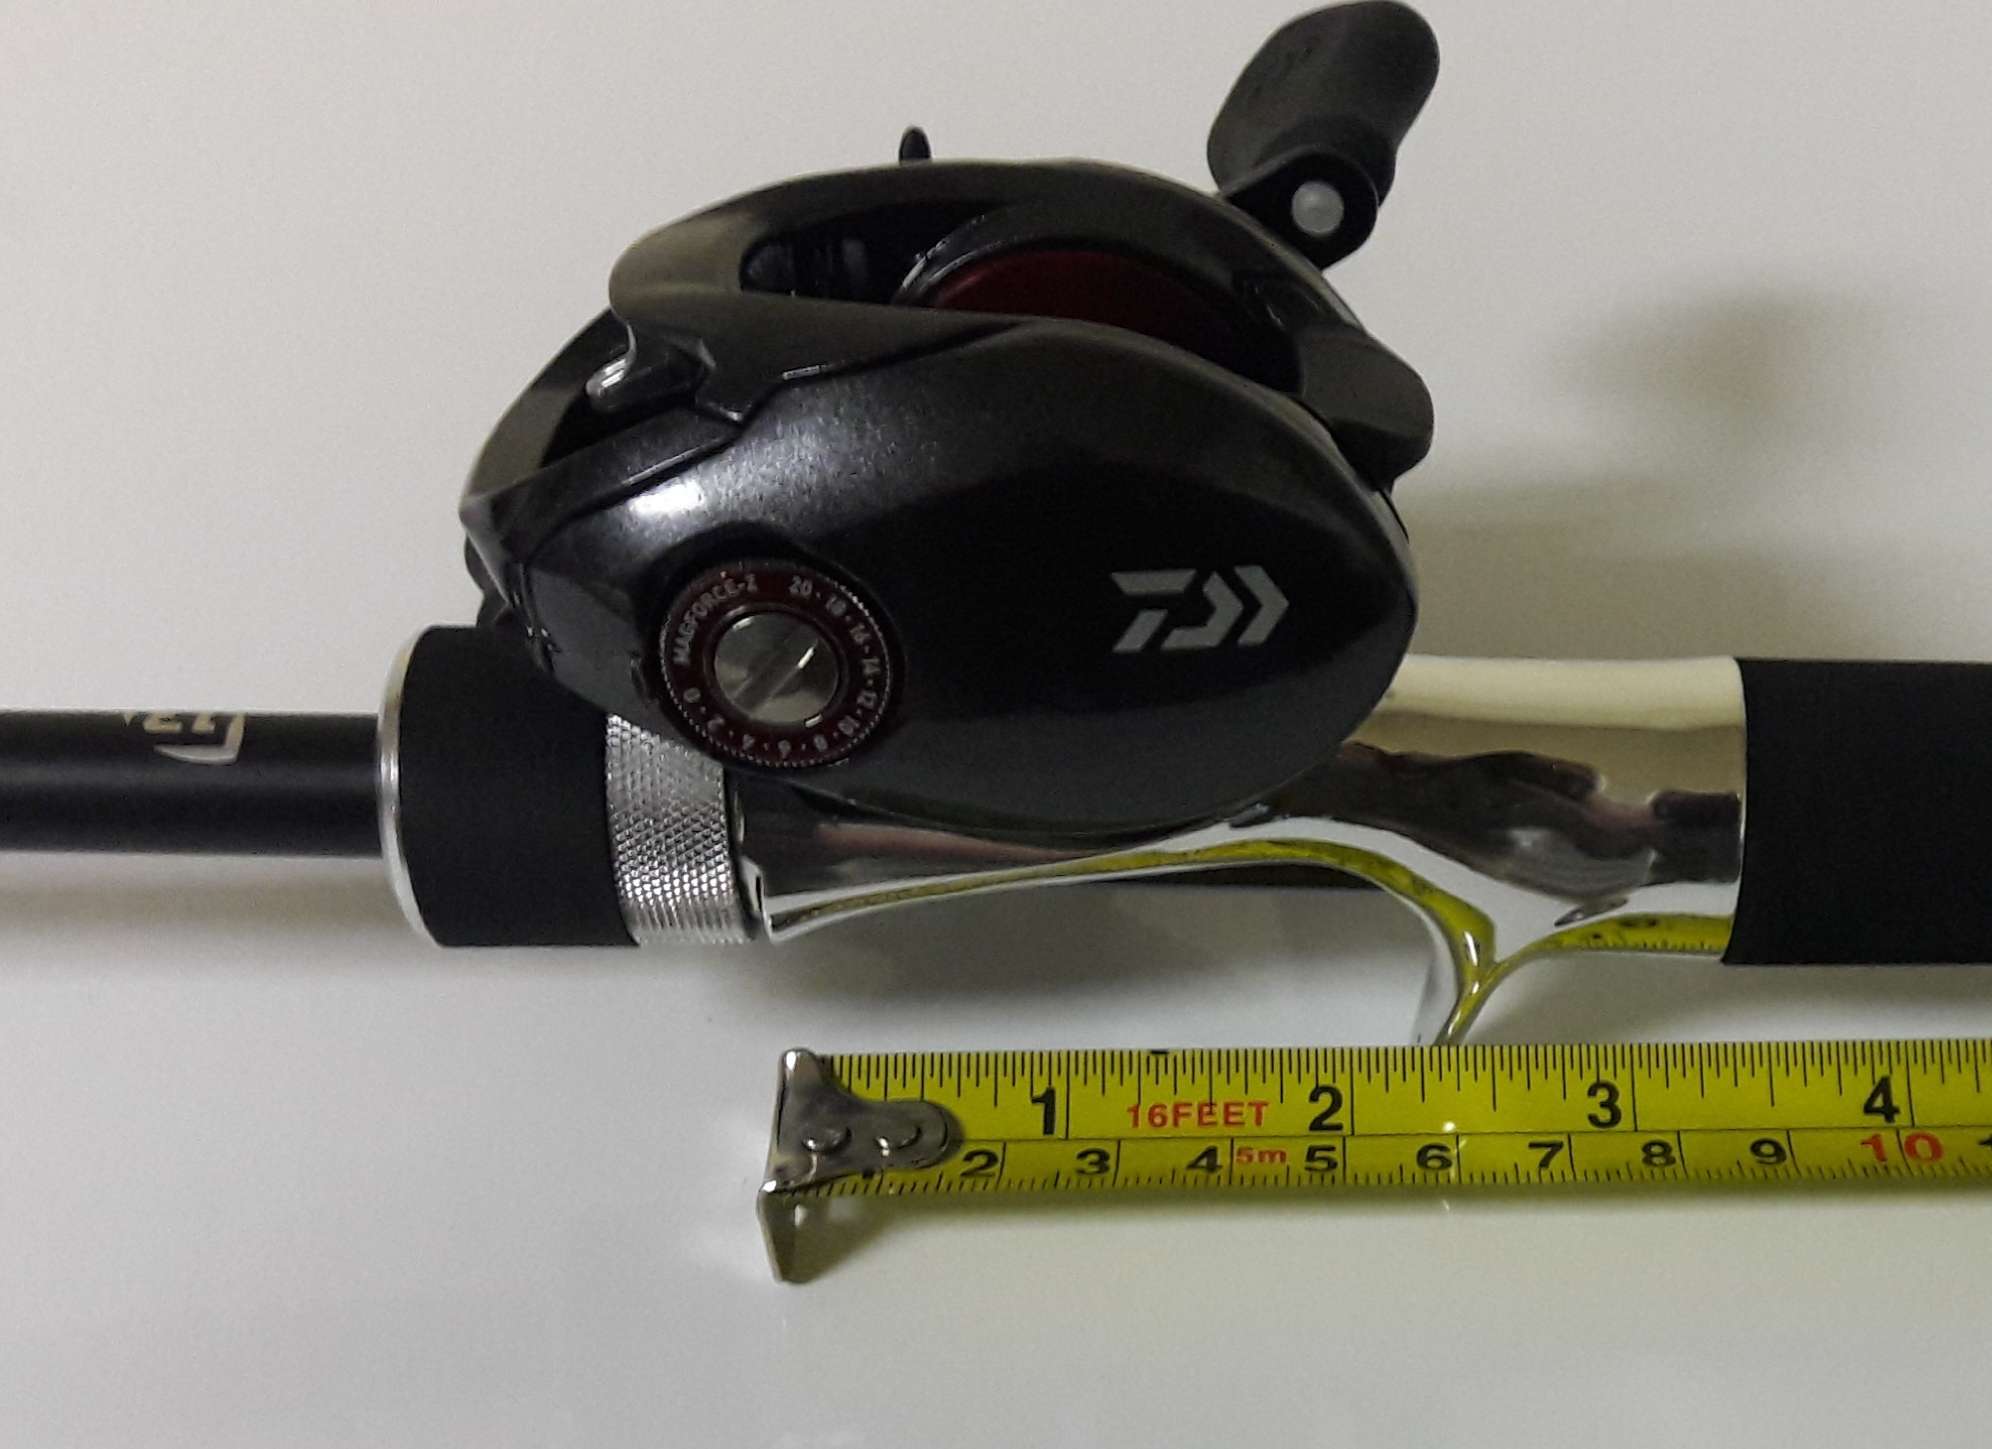 New Envy Black 2's - Fishing Rods, Reels, Line, and Knots - Bass Fishing  Forums